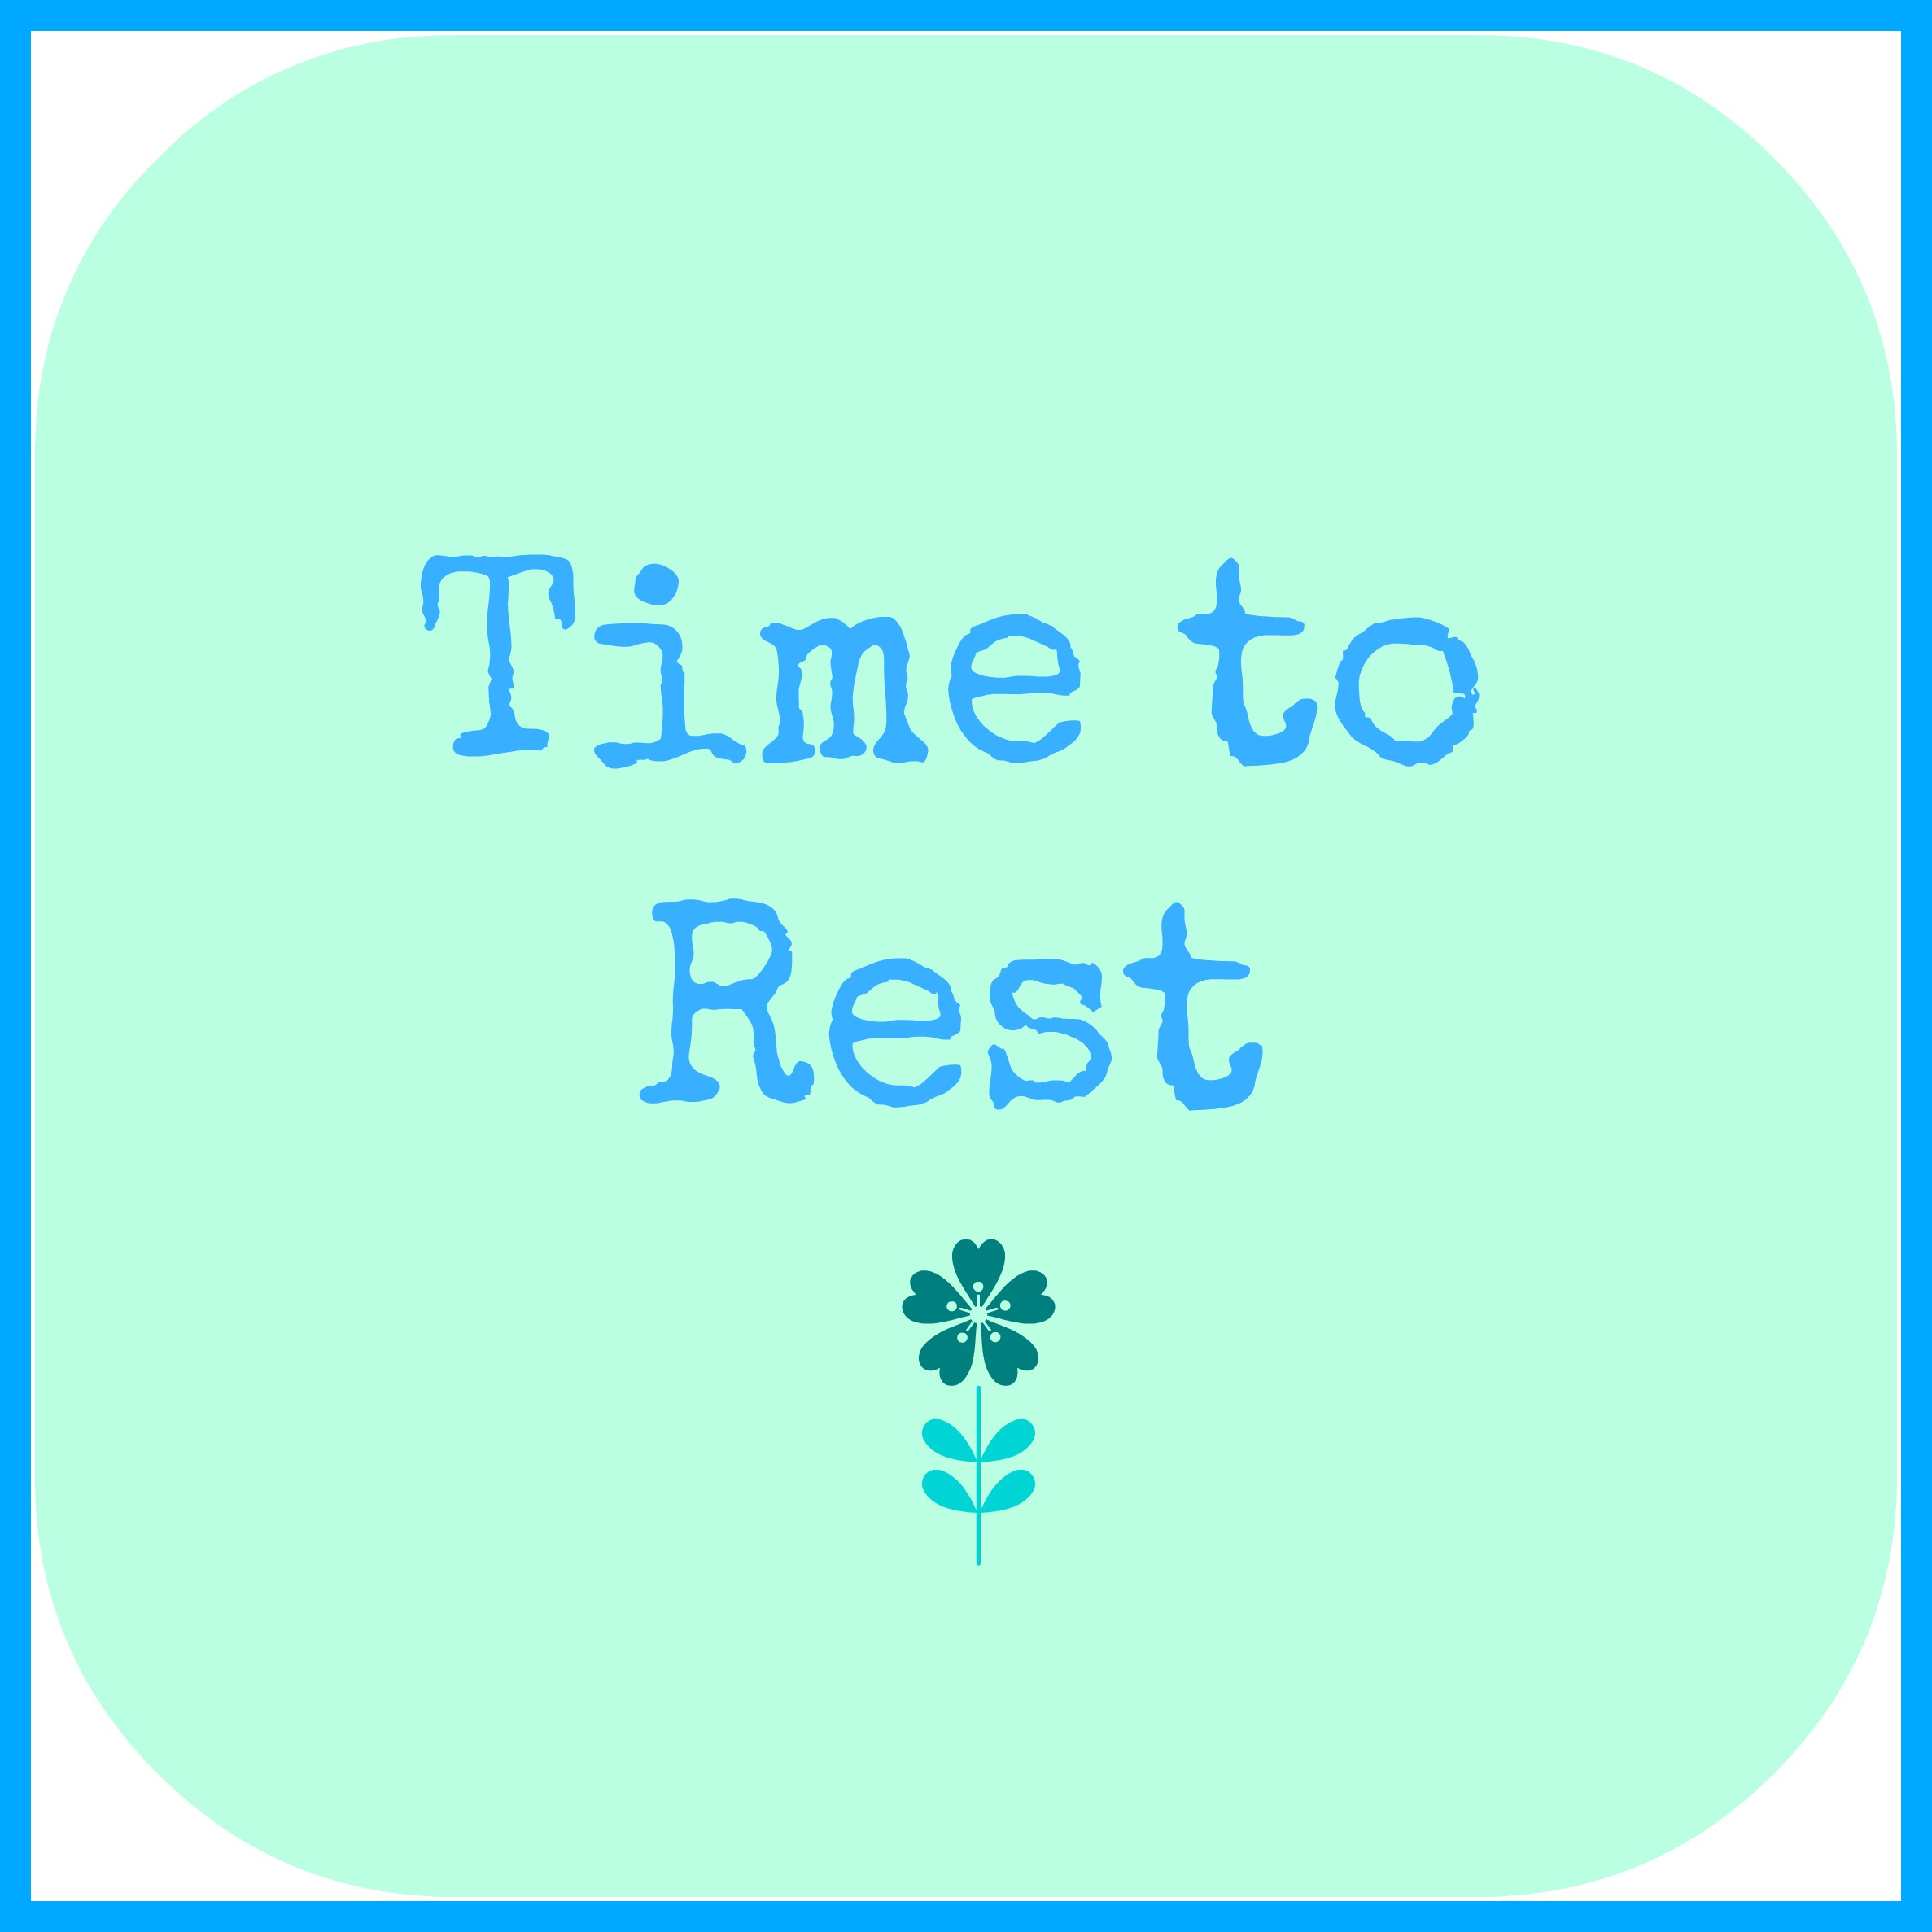 Rest значение. Rest time. Time to have a rest. Rest картинка. Let's have a rest.